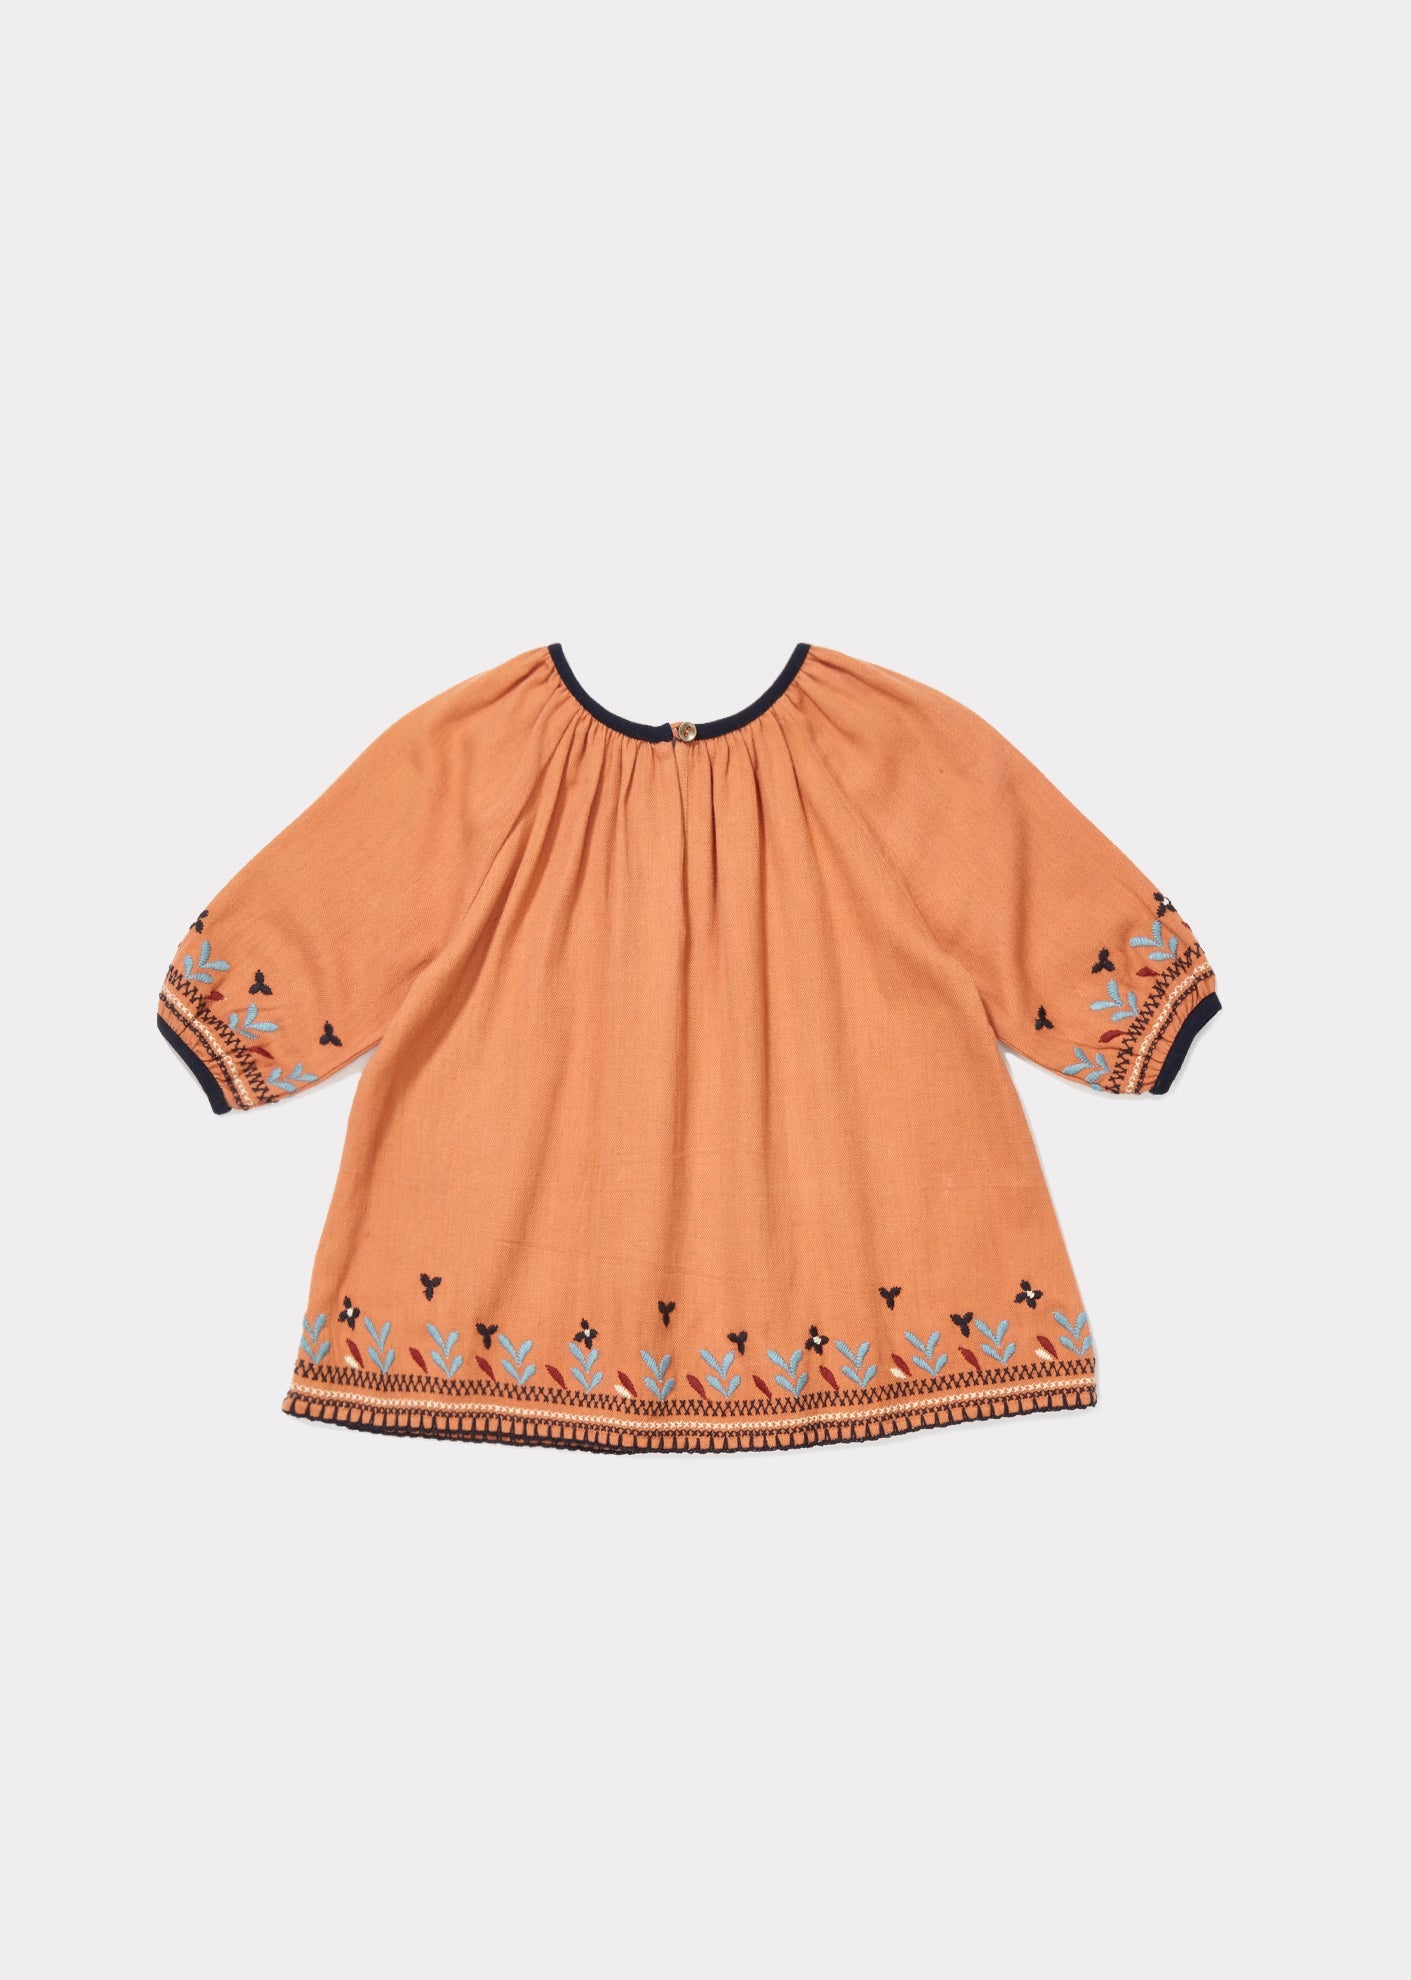 LYDFORD EMBROIDERY BABY DRESS - PERSIMMON